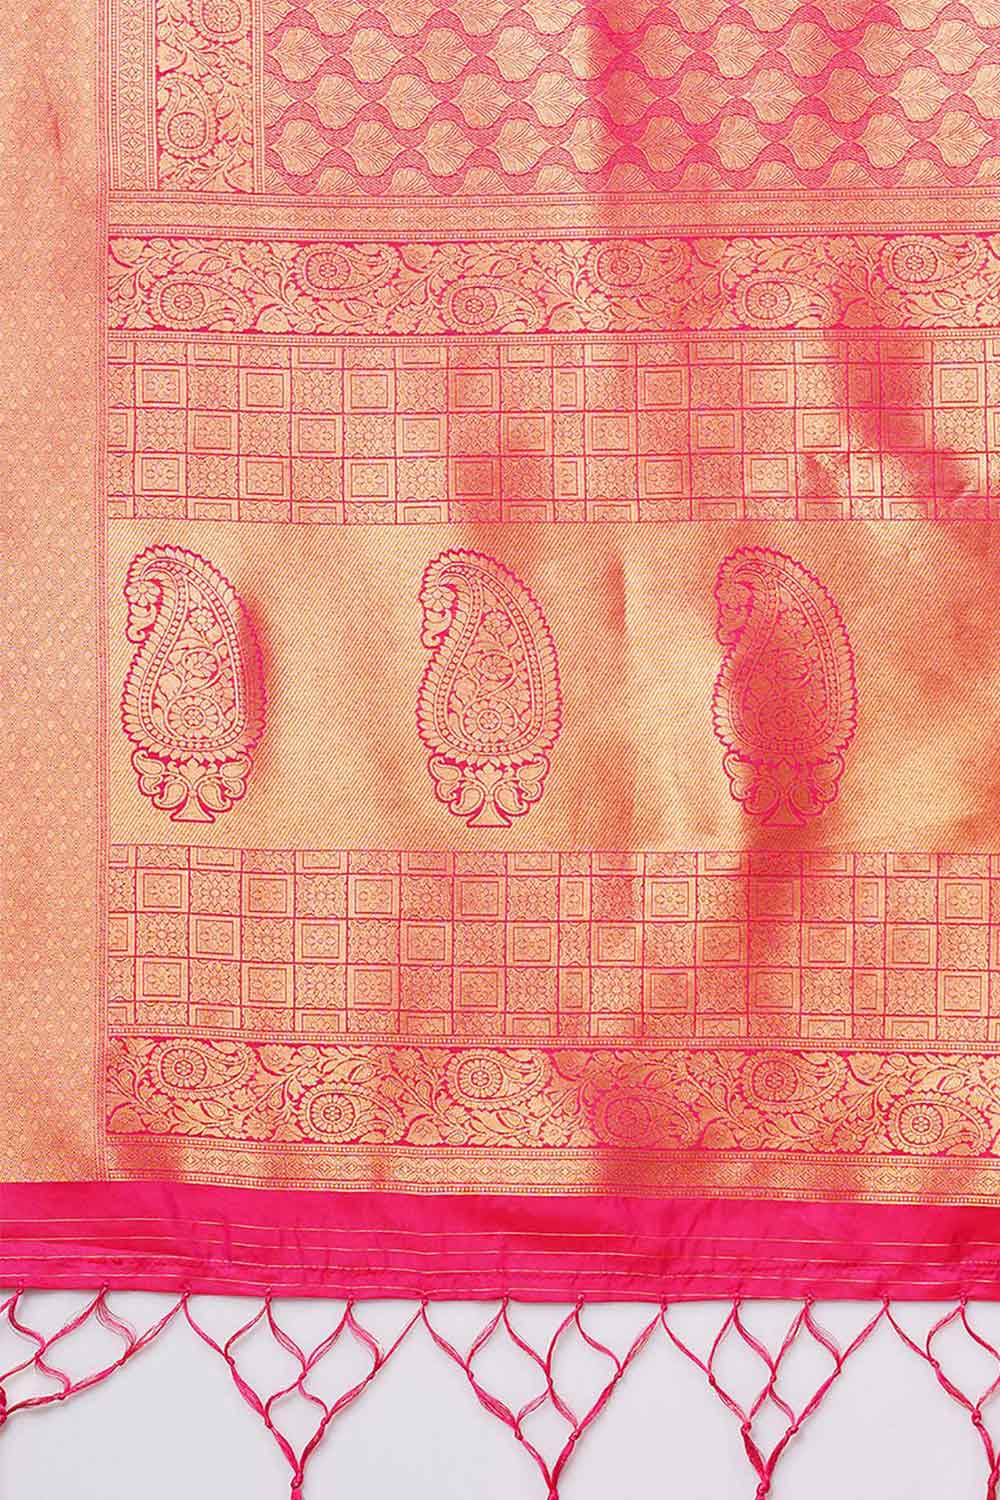 Buy Pink Zari Woven Blended Silk One Minute Saree Online - Zoom In